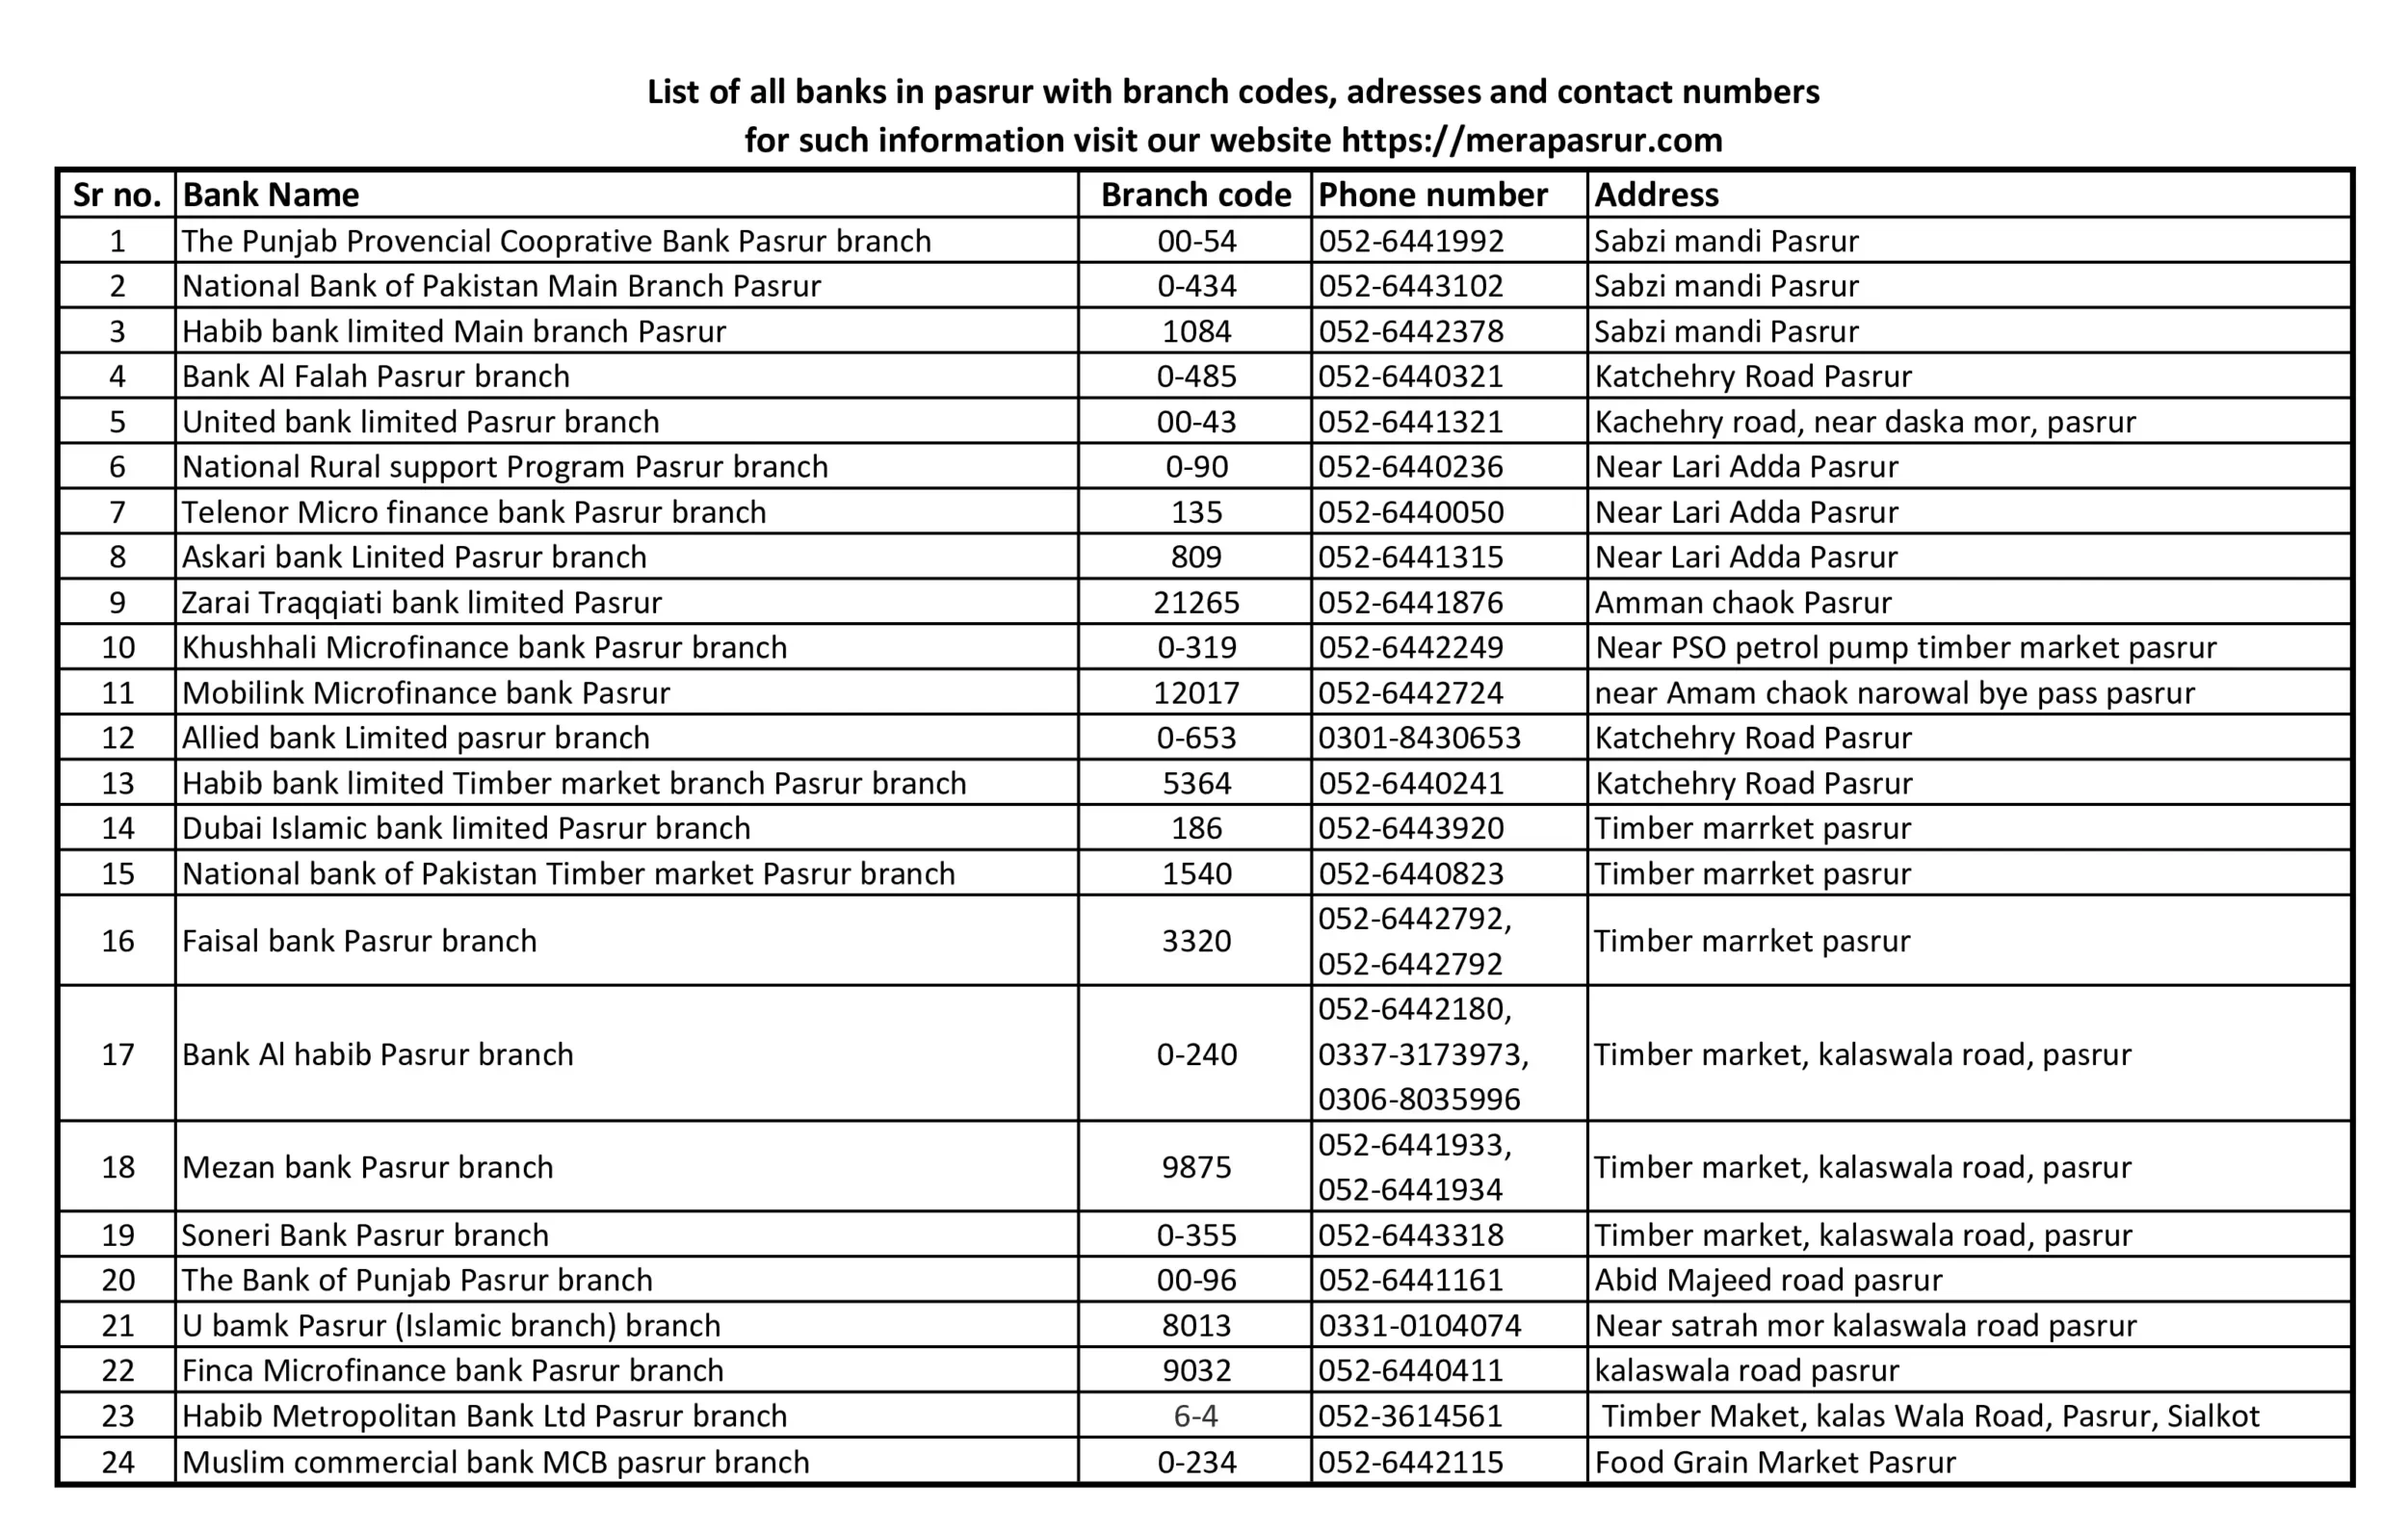 List of all 24 banks in pasrur with branch code and Phone number